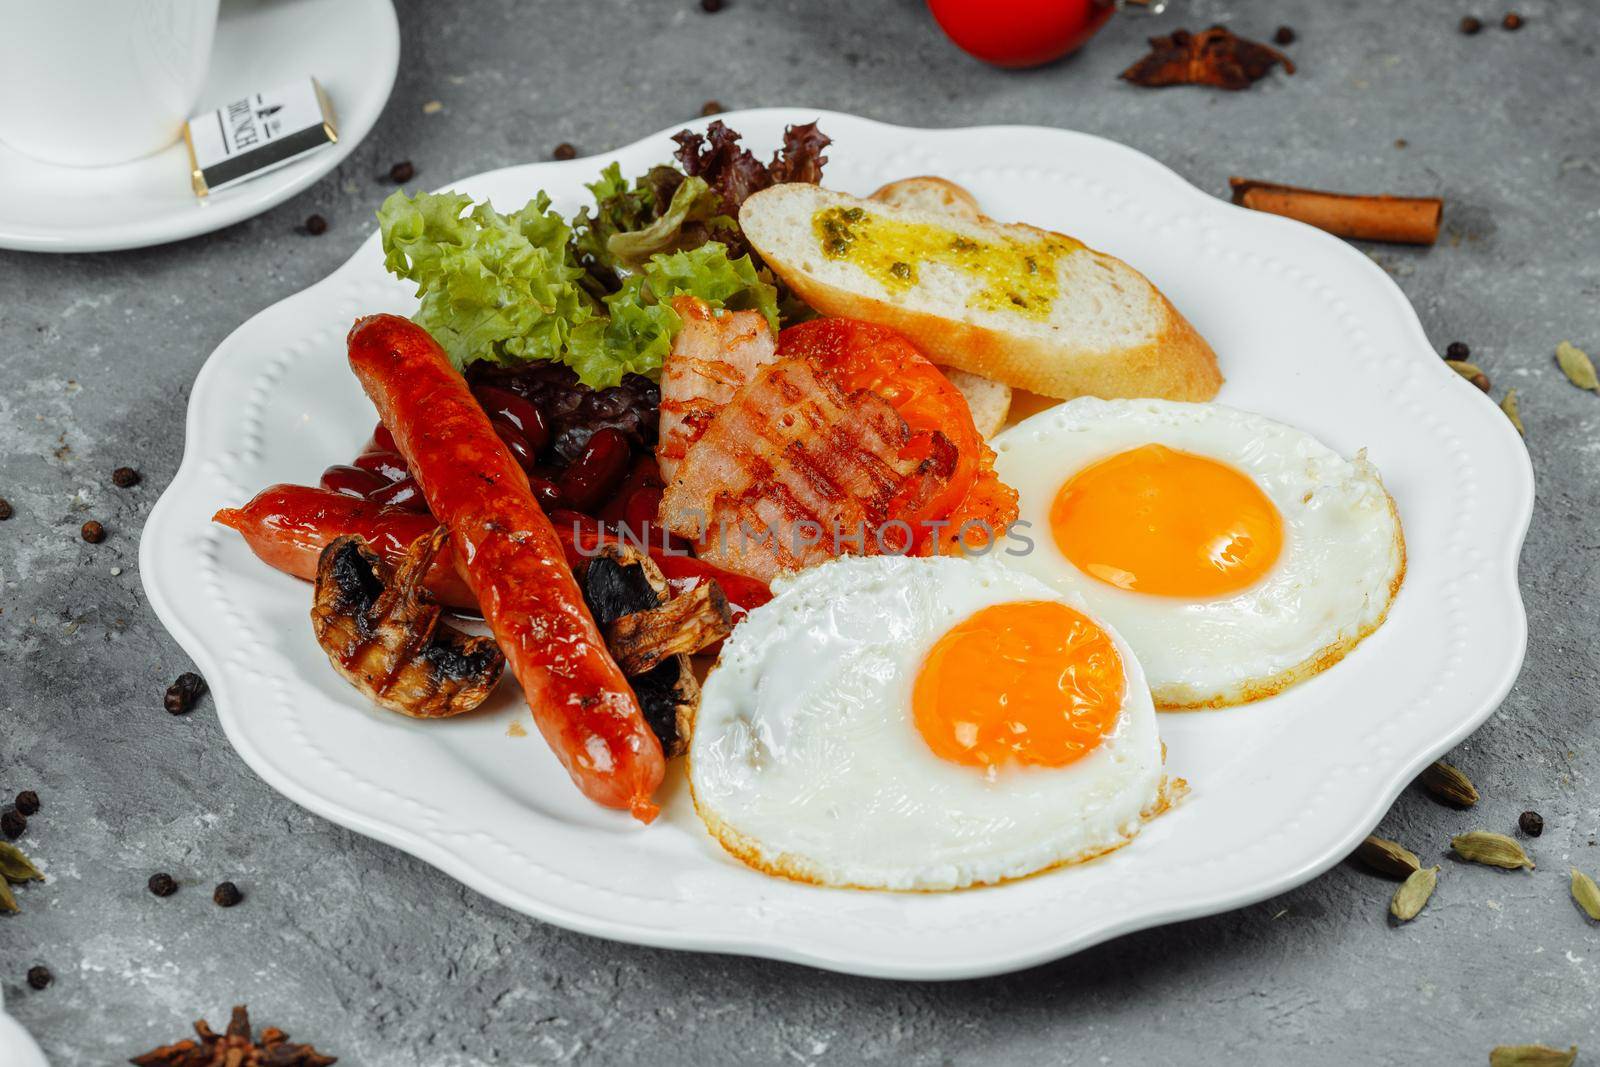 Fried breakfast with bacon, sausages and baked beans by UcheaD